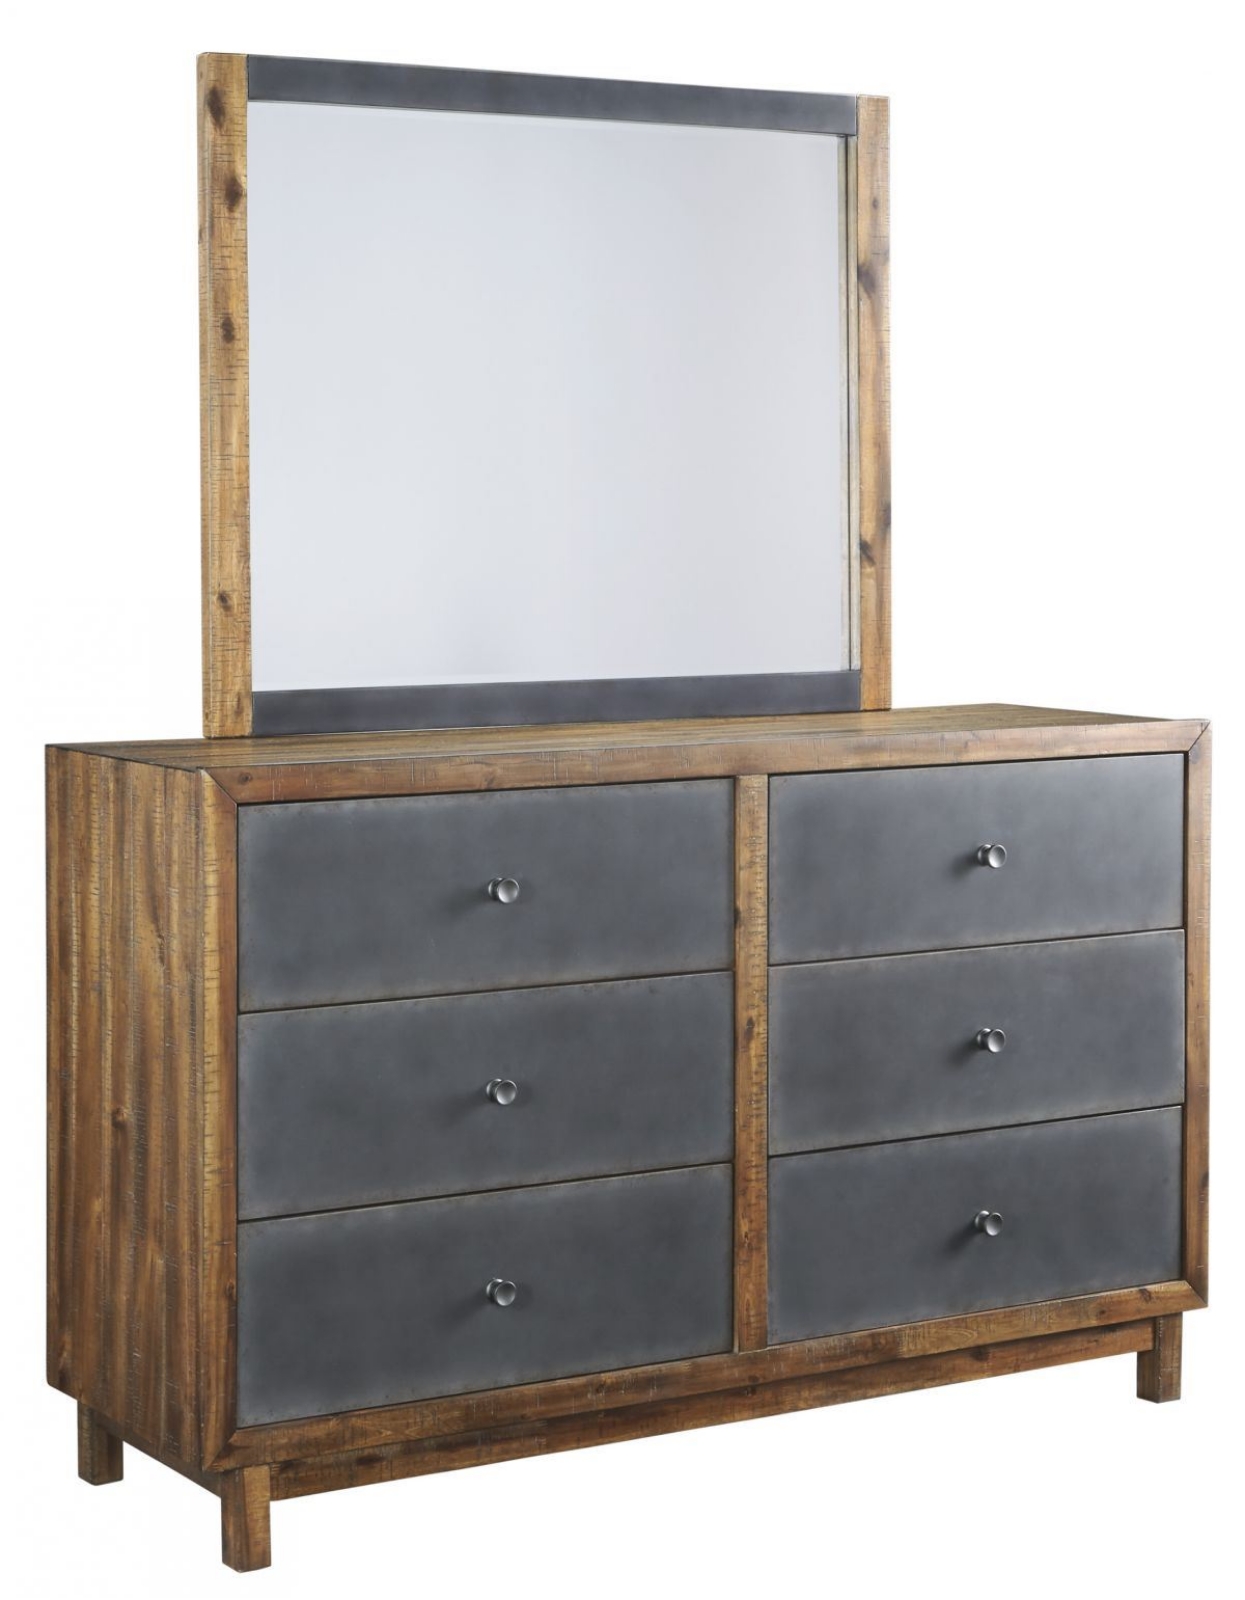 Picture of Harlynx Dresser & Mirror